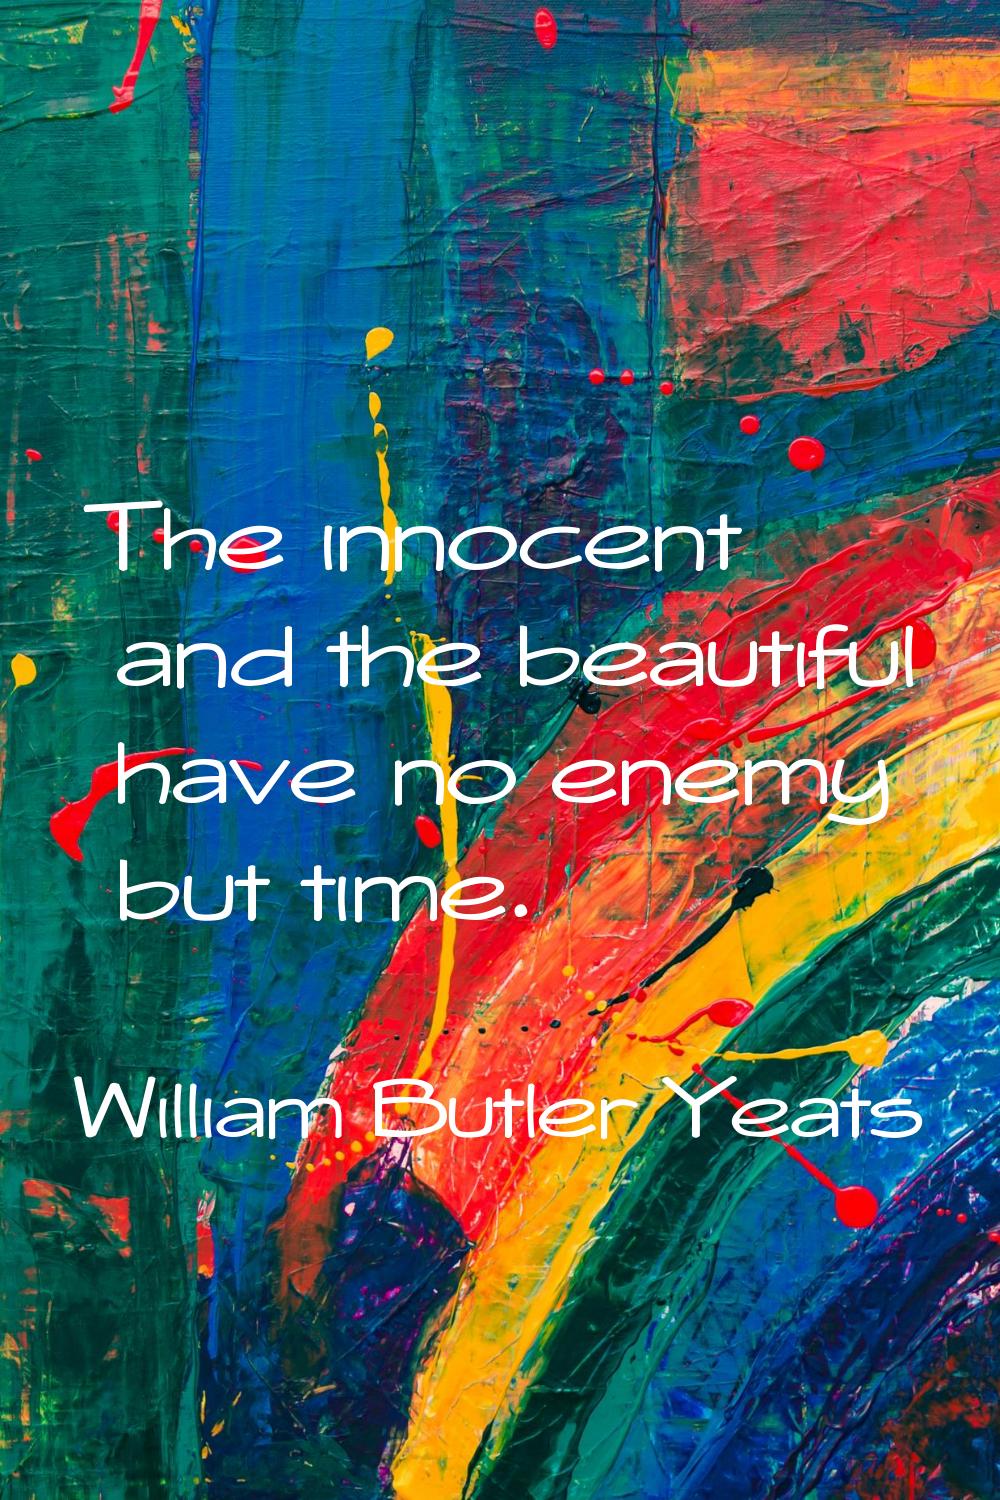 The innocent and the beautiful have no enemy but time.